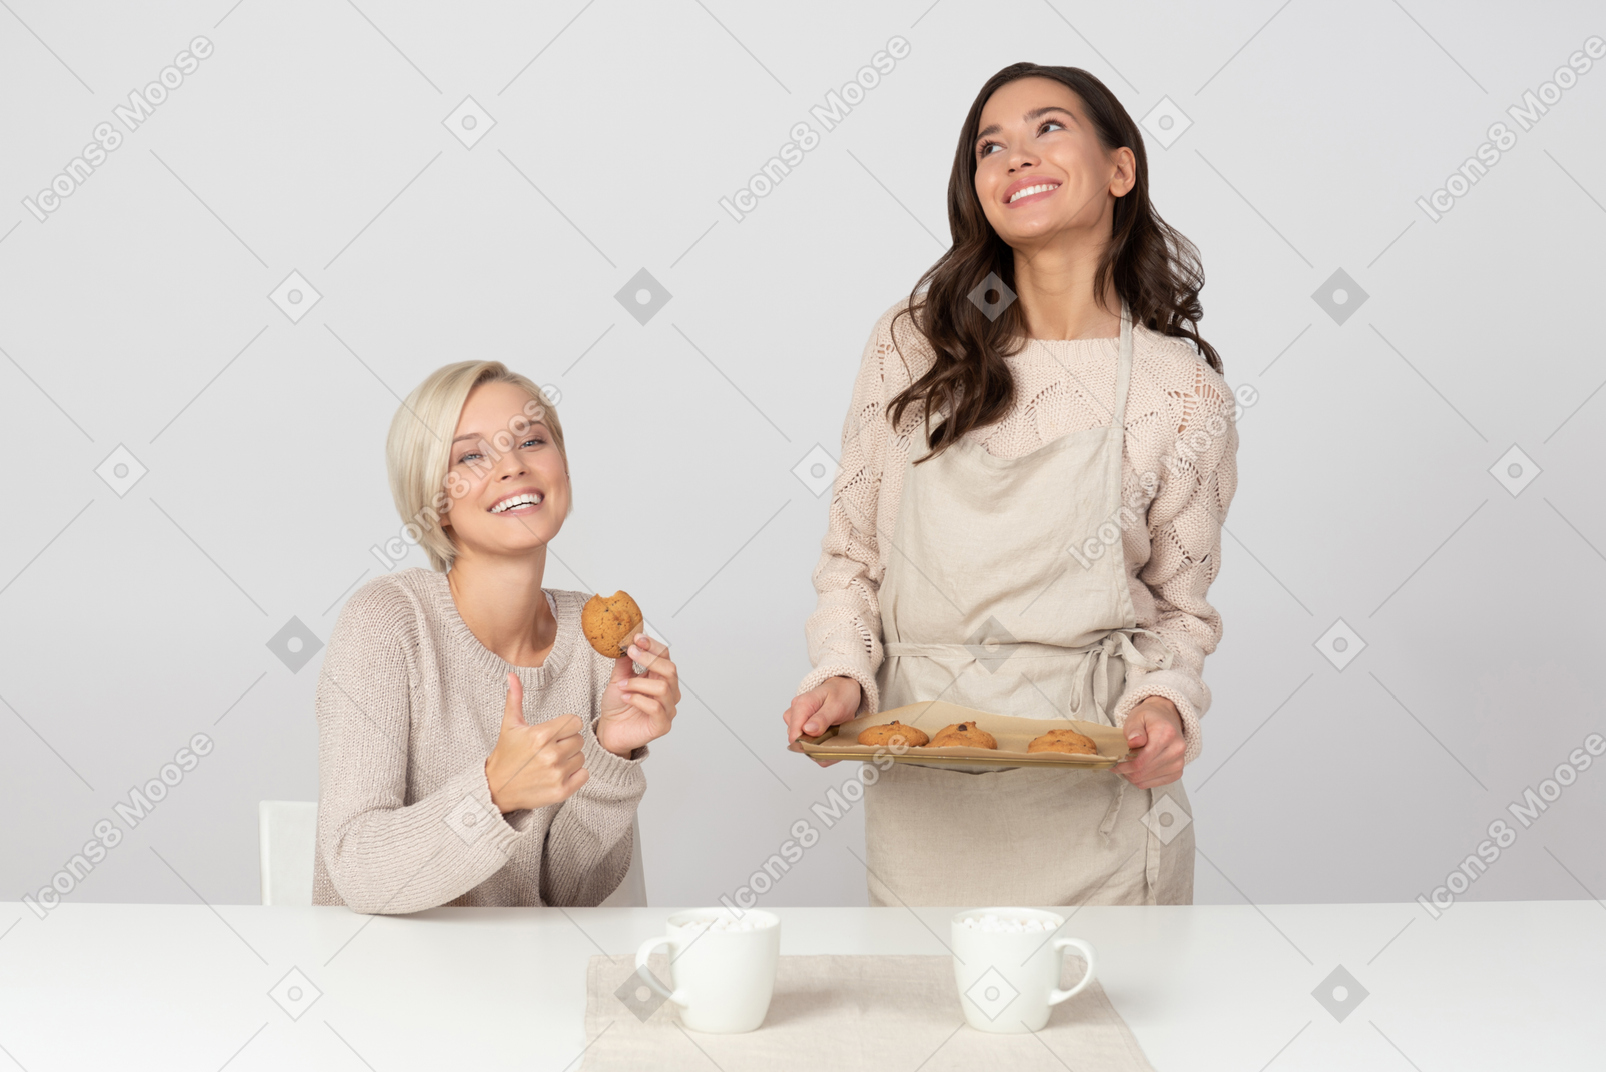 Young woman trying her friend's homemade cookies